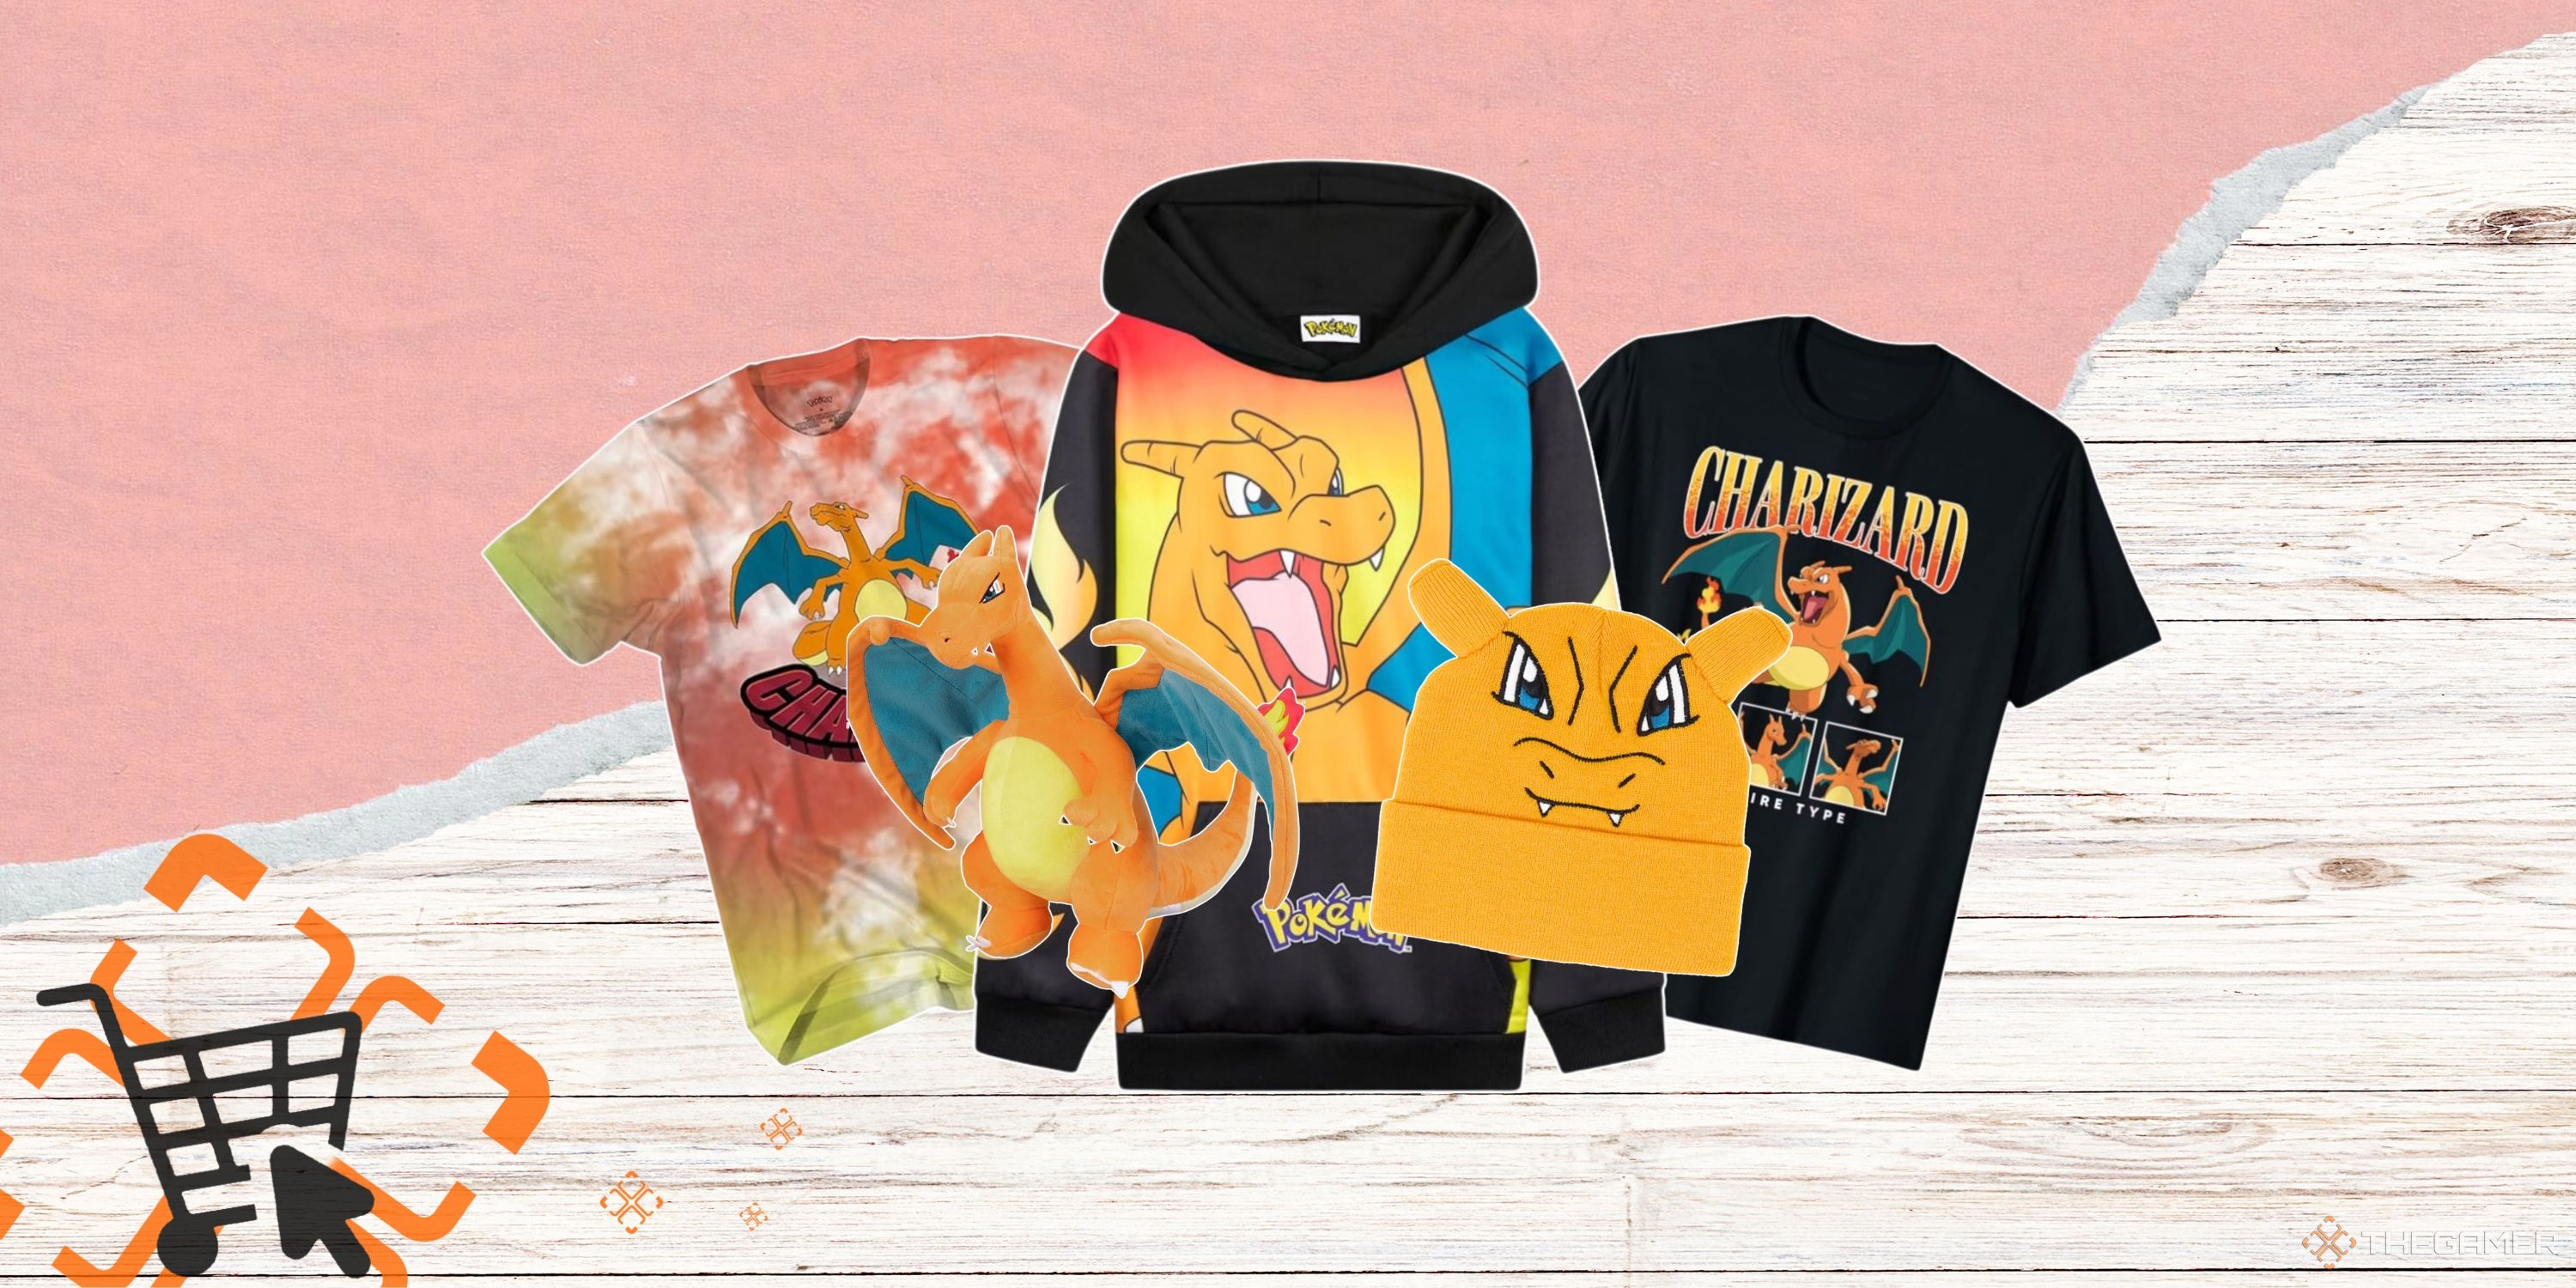 Best Gifts To Buy Fans Of Charizard